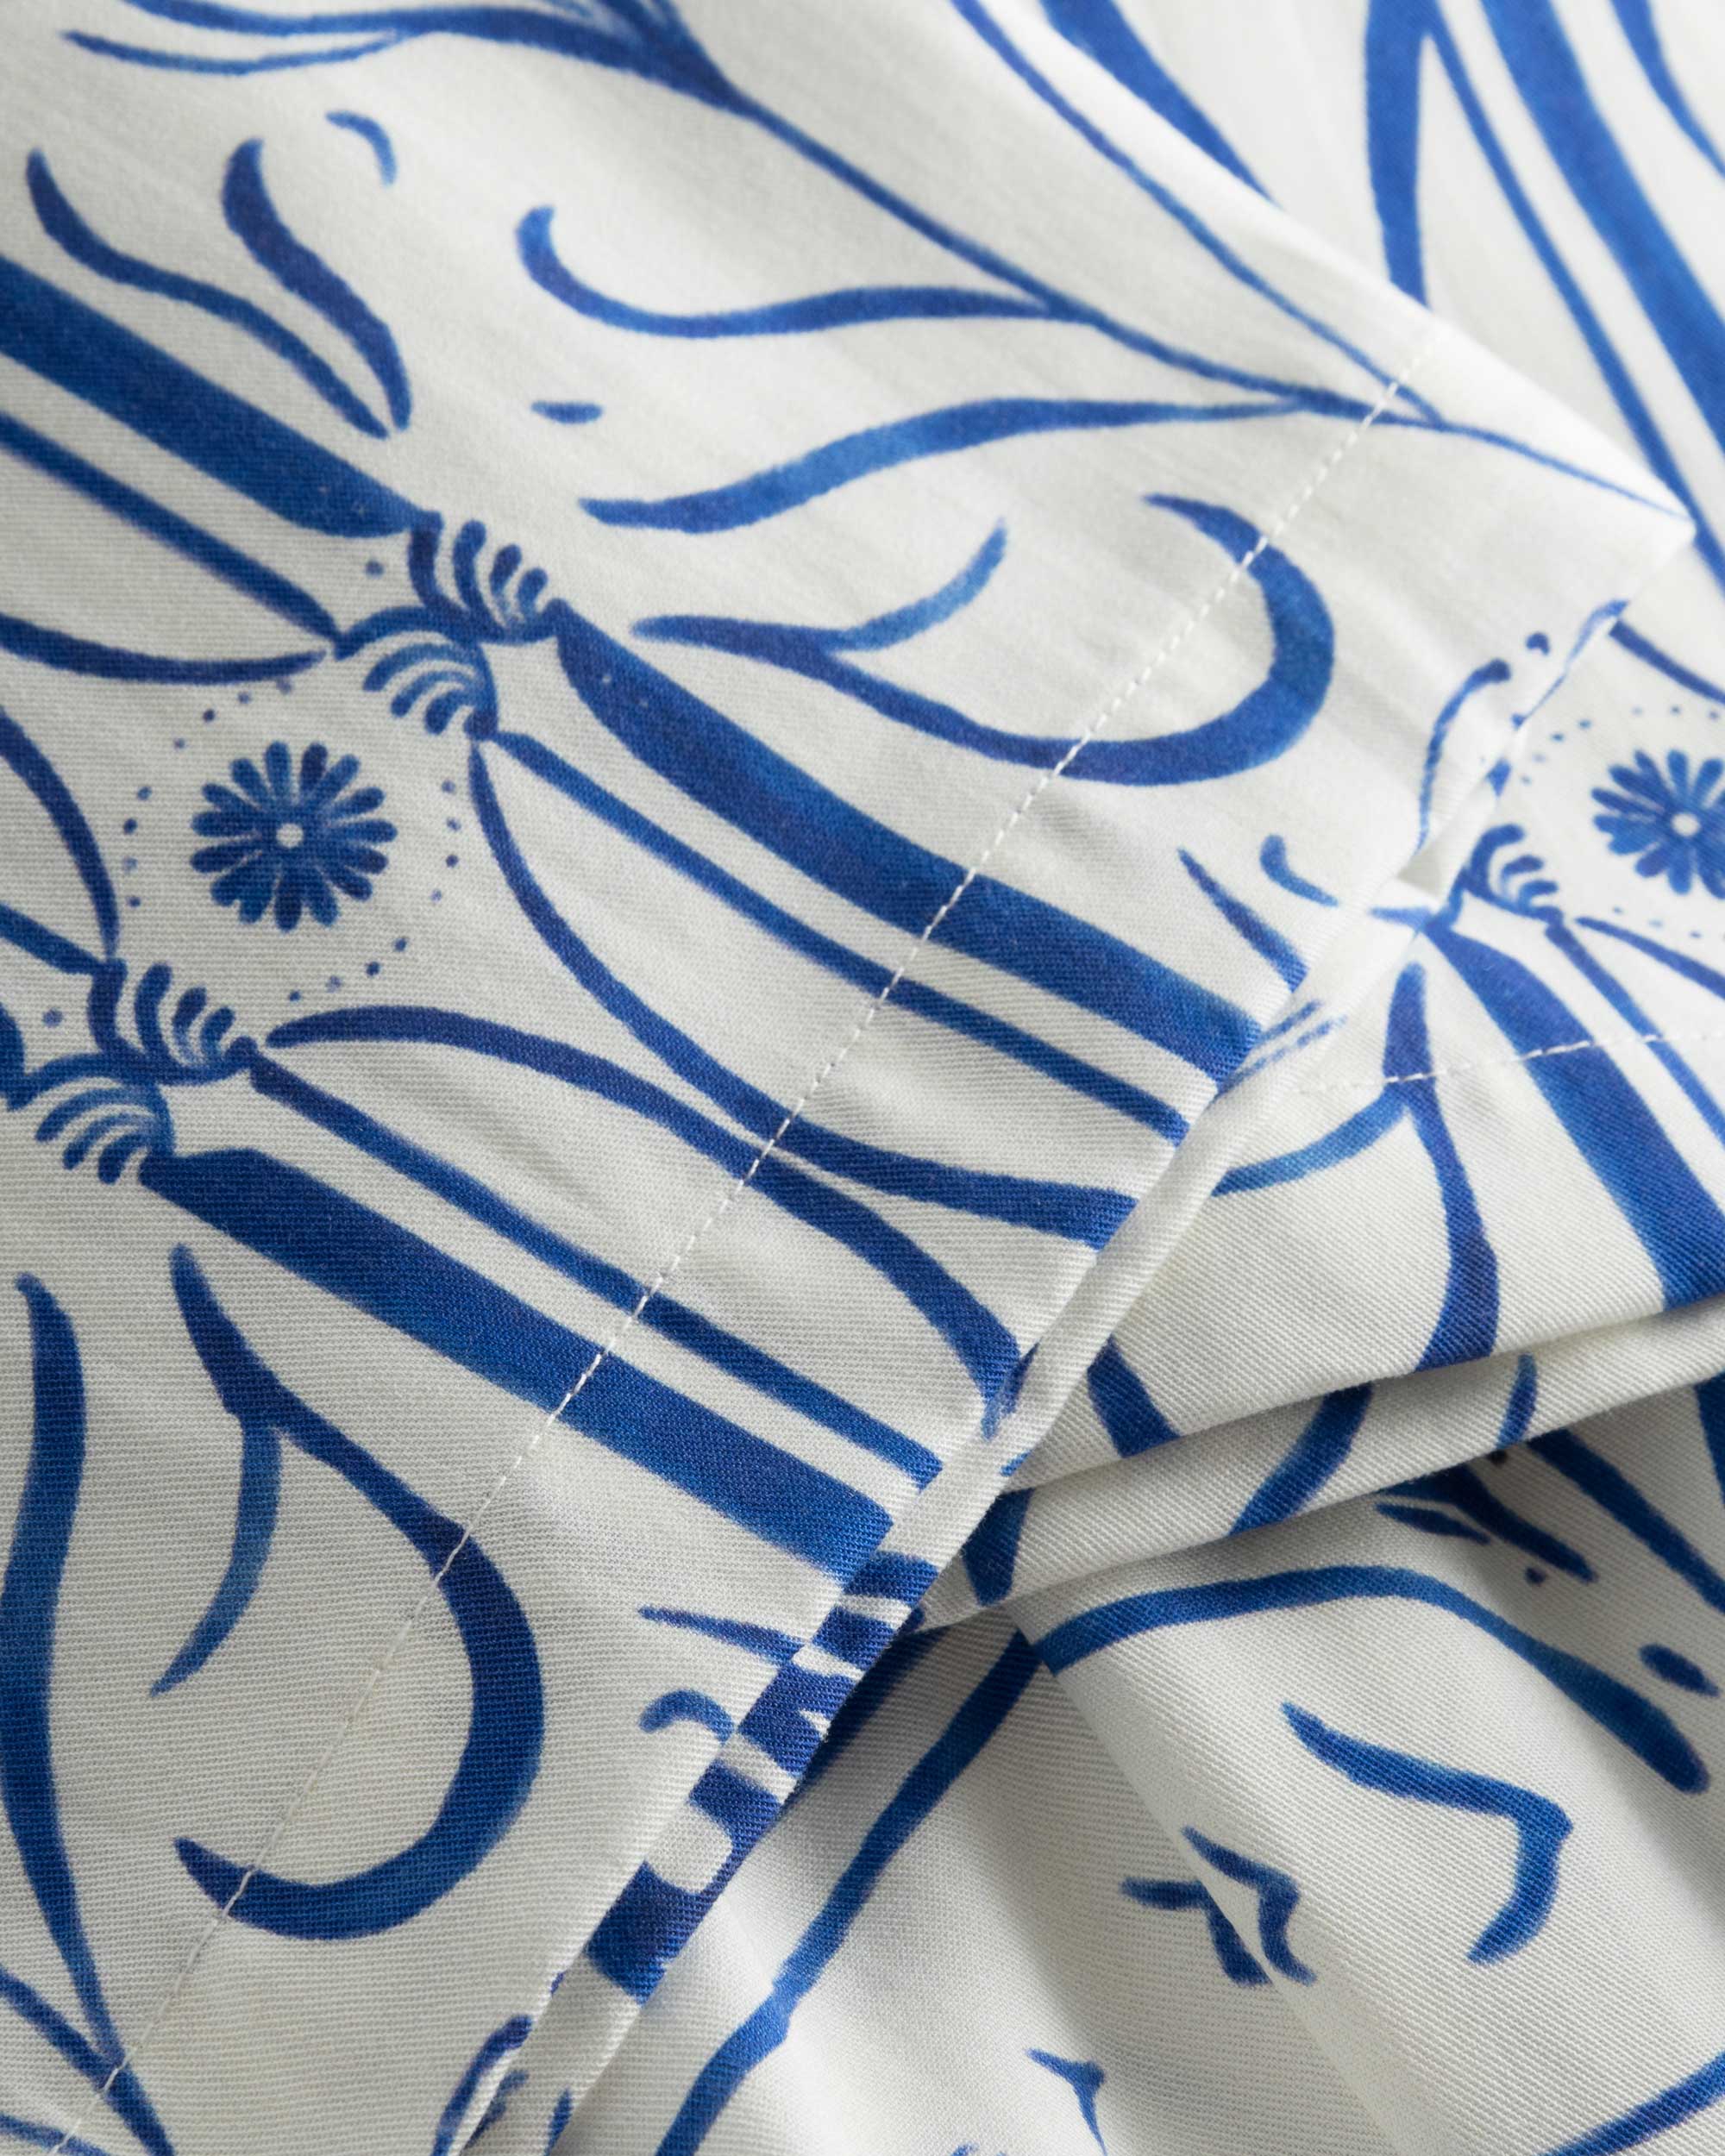 Close-up of stitchings and blue graphic pattern on white vacation pants 